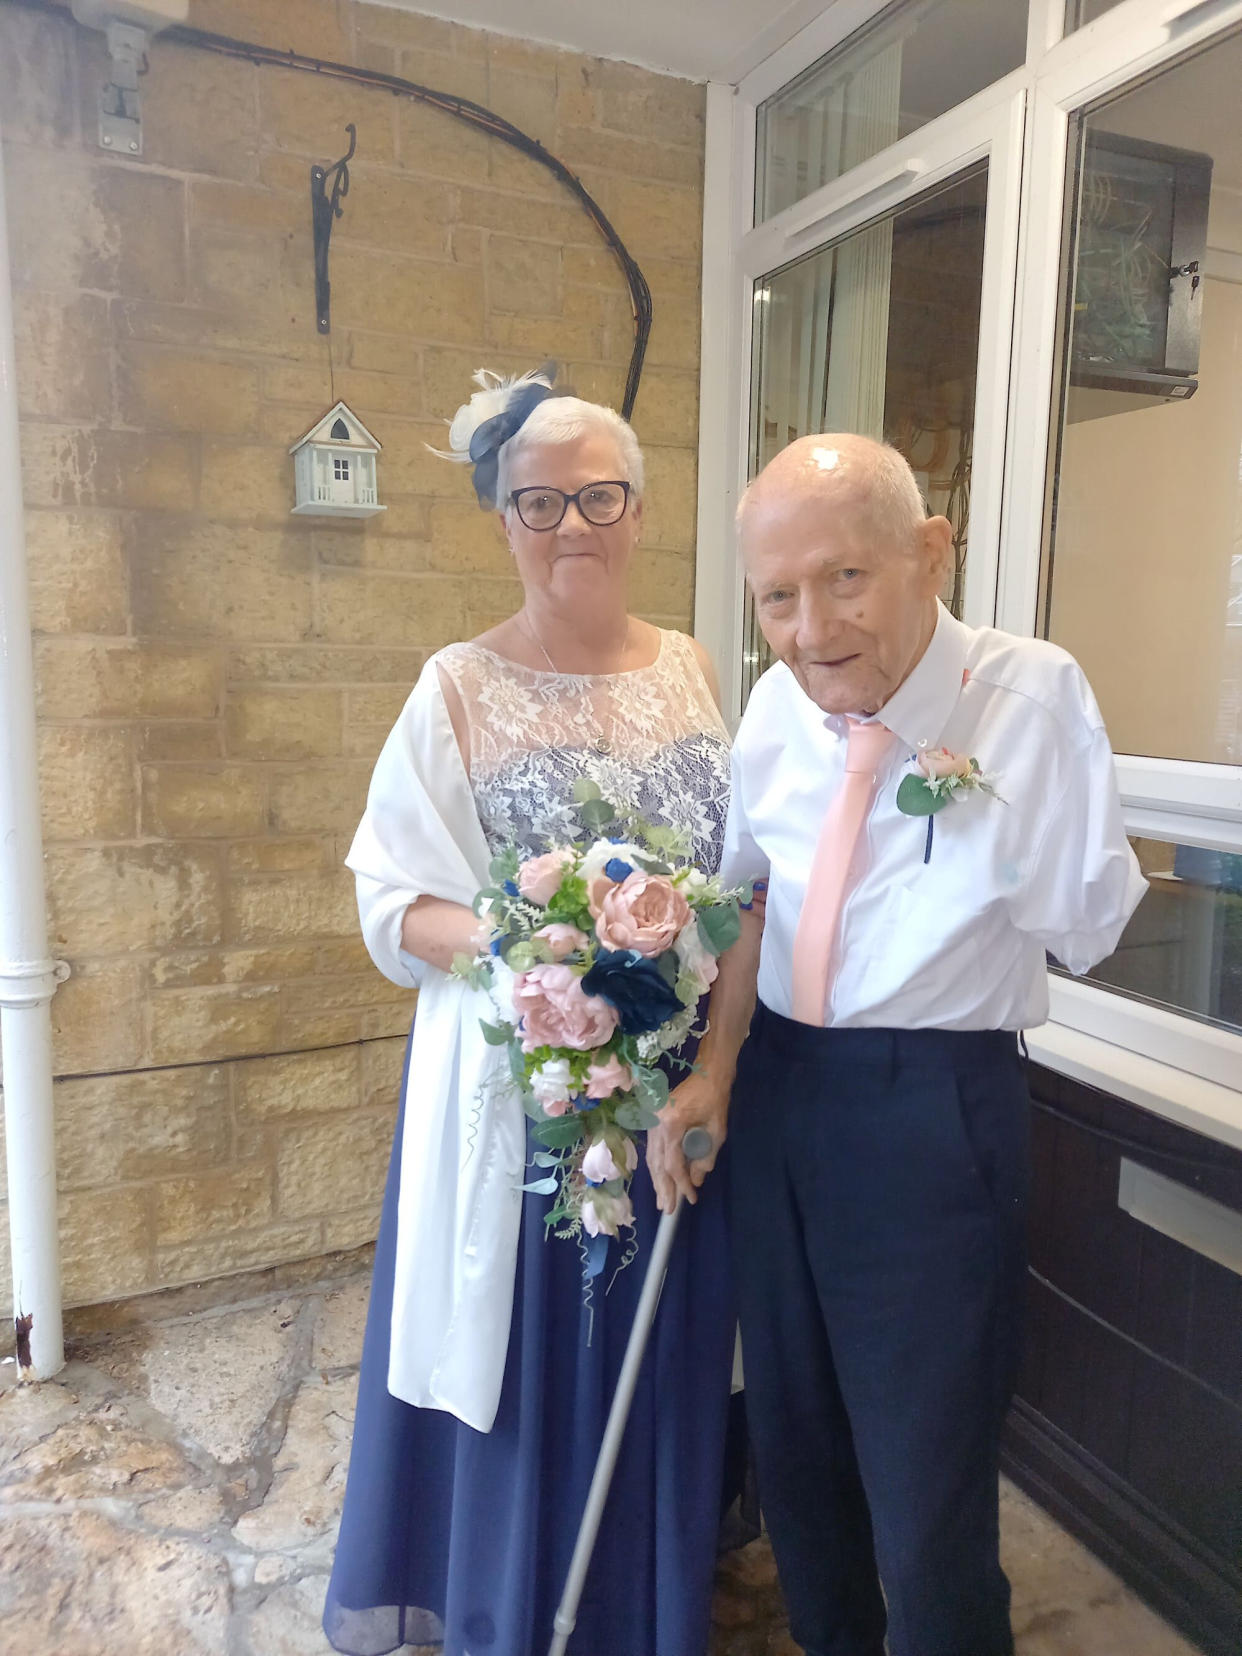 Newly weds! Jim and Lynne Hawkins married at Cheltenham Care Home OSJCT Grevill House earlier this month. (SWNS) 